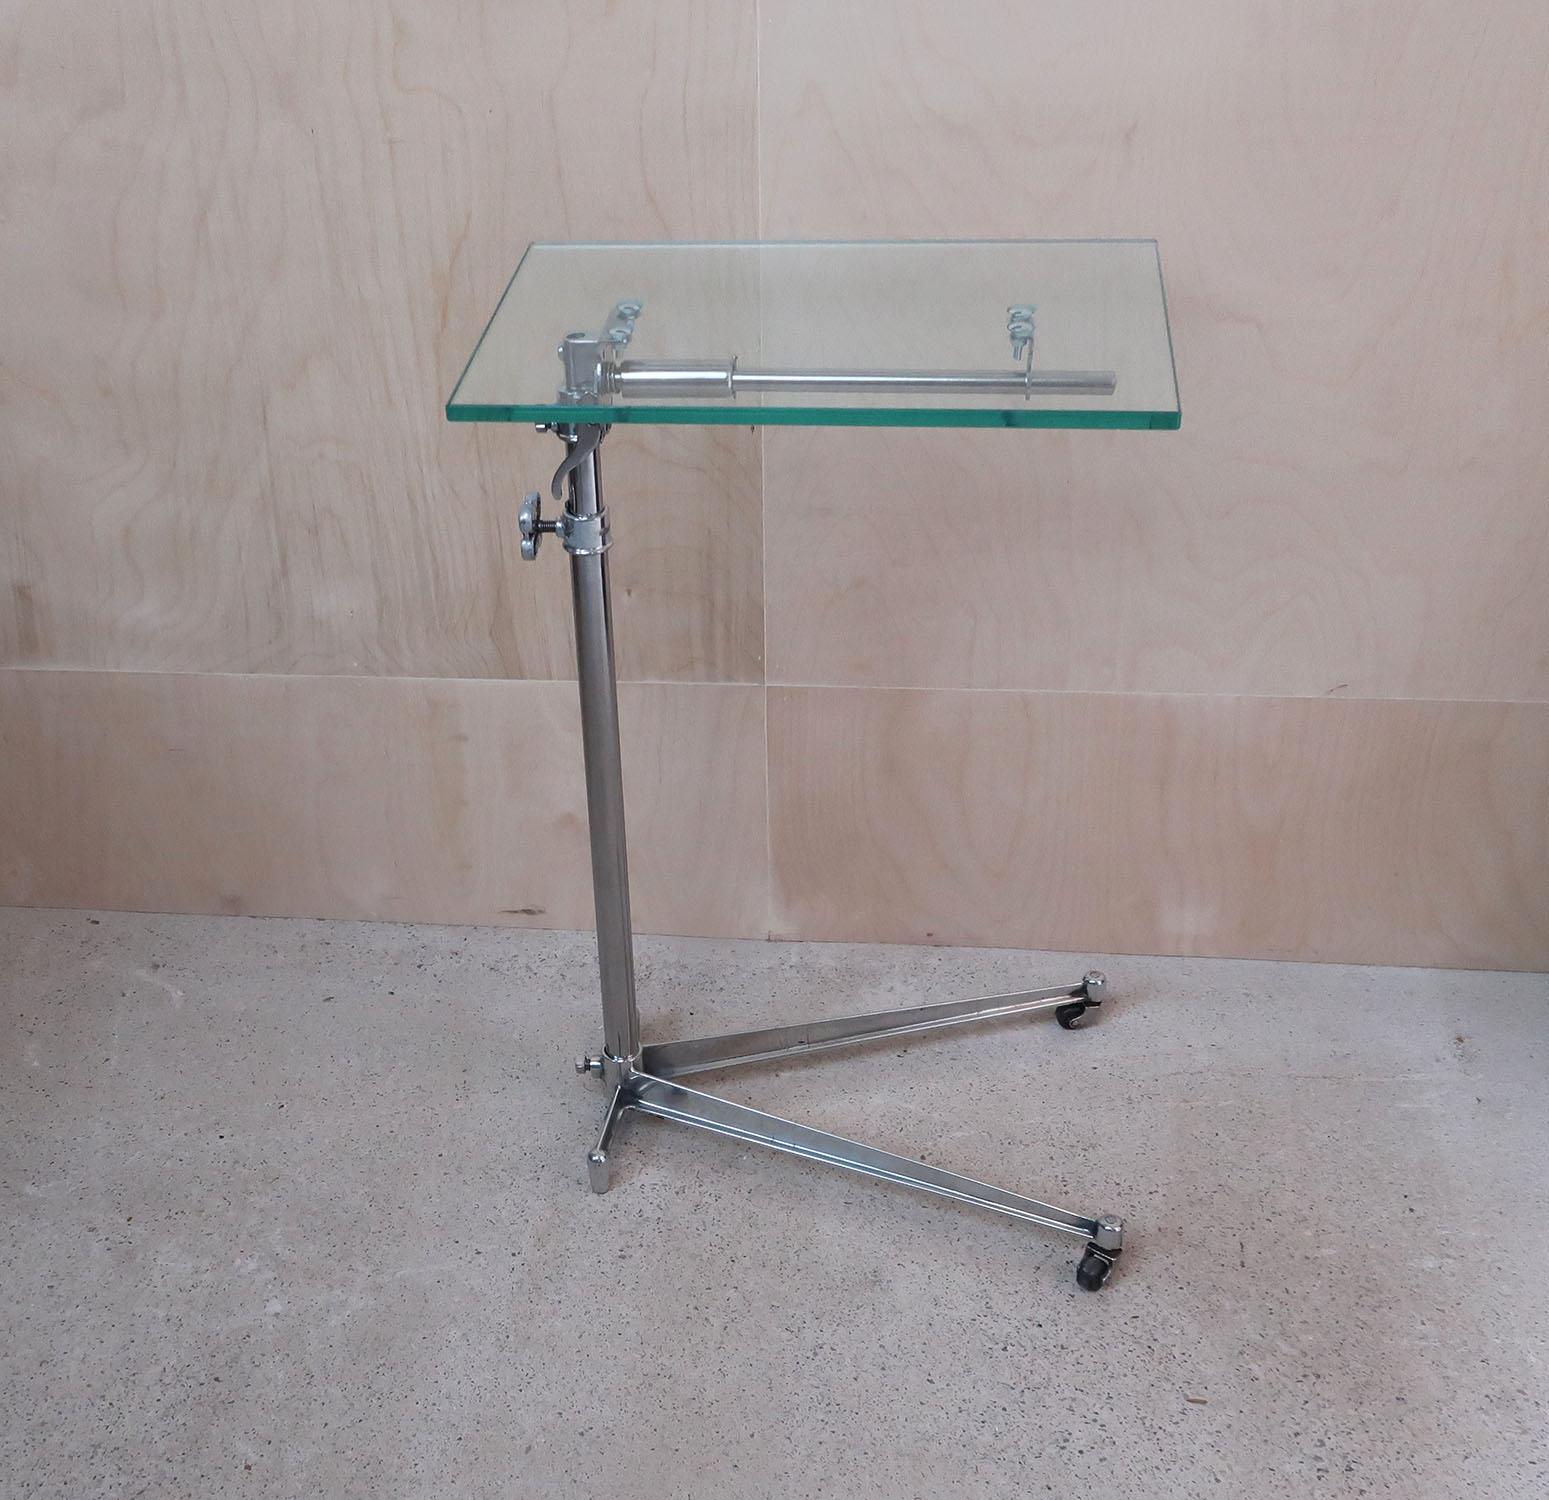 Stylish side or work table with an elegant Industrial look.

Made of polished steel and aluminium with a new toughened glass top.

The top is adjustable by loosening the handle on the side.

The top can also be tilted.

On the original